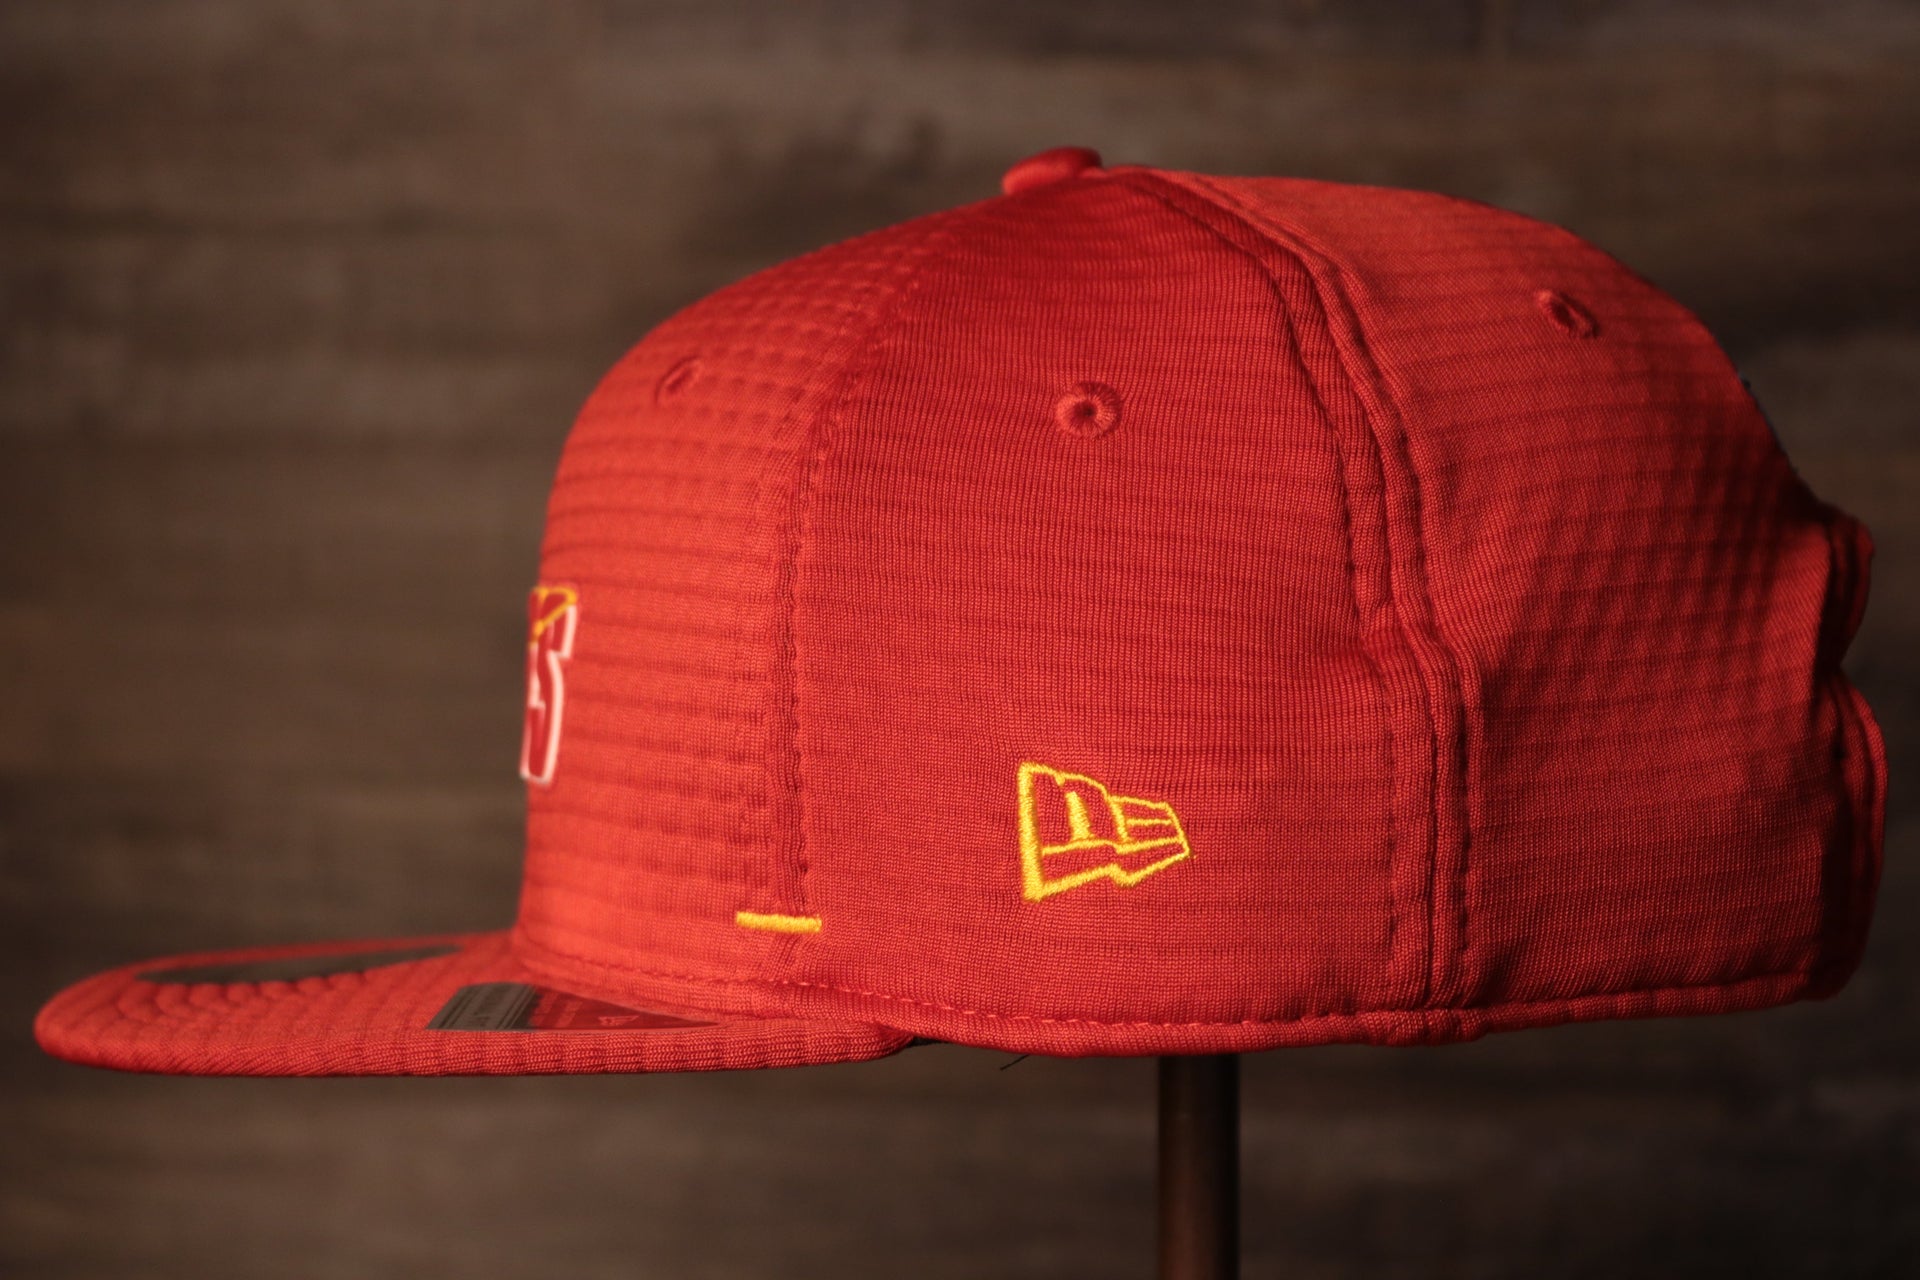 The wearers left side has the new era logo Chiefs 2020 Training Camp Snapback Hat | Kansas City Chiefs 2020 On-Field Red Training Camp Snap Cap